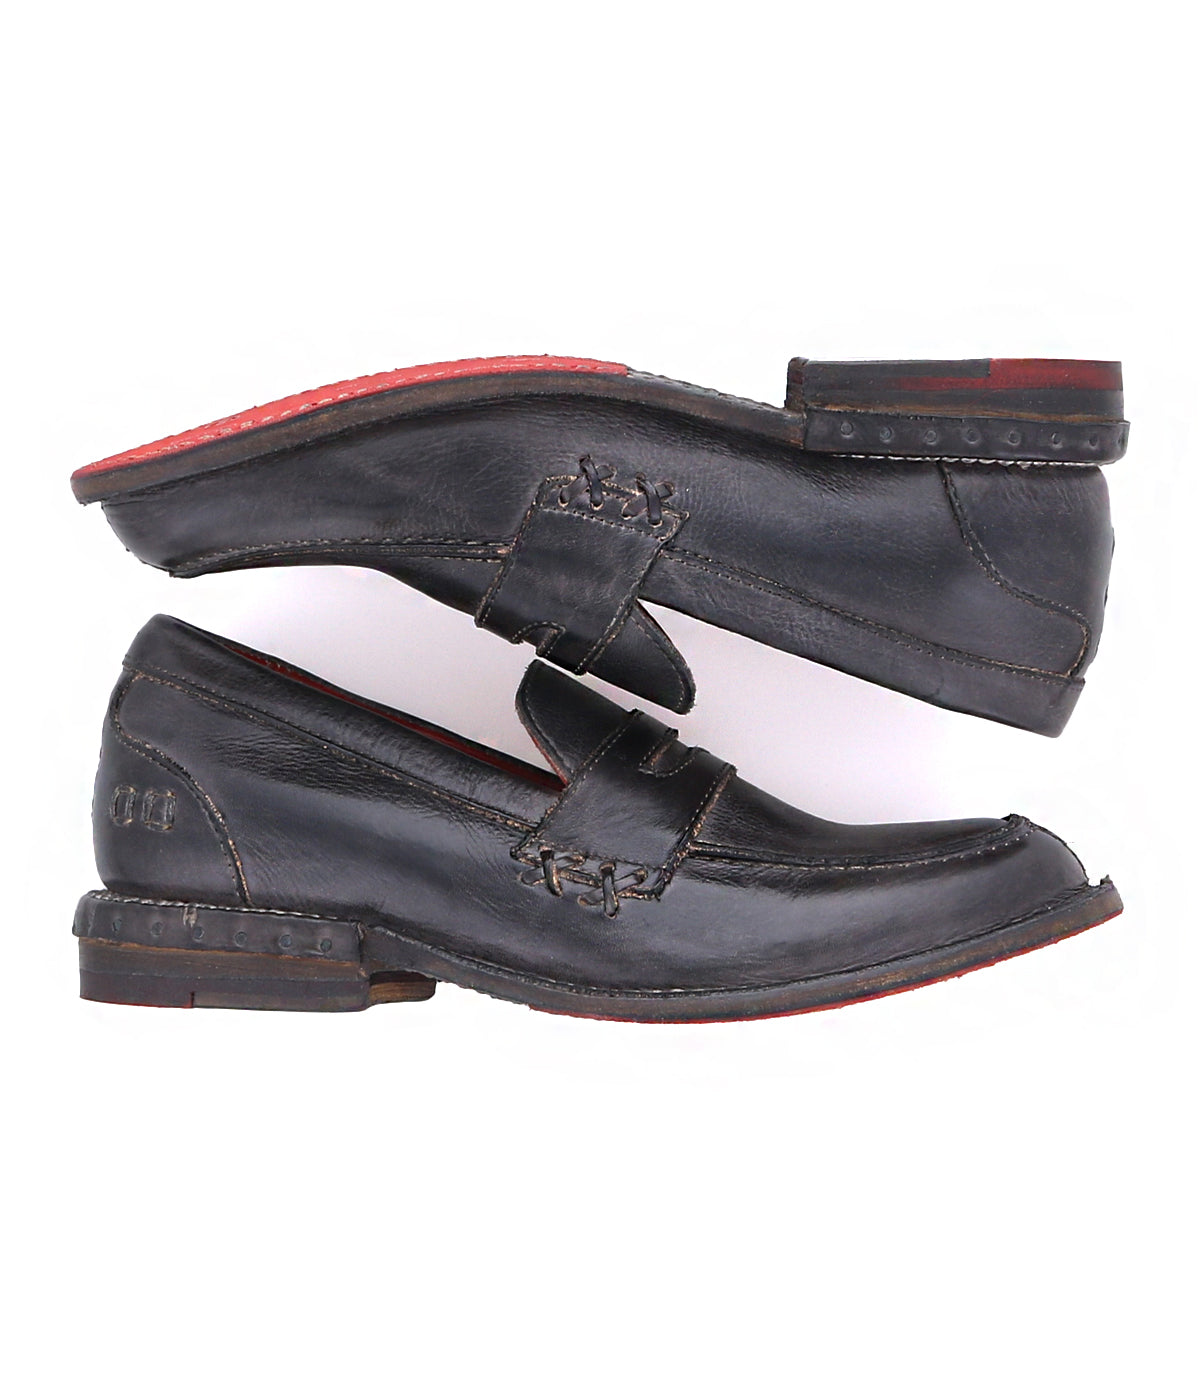 A pair of Reina loafers by Bed Stu with red soles.